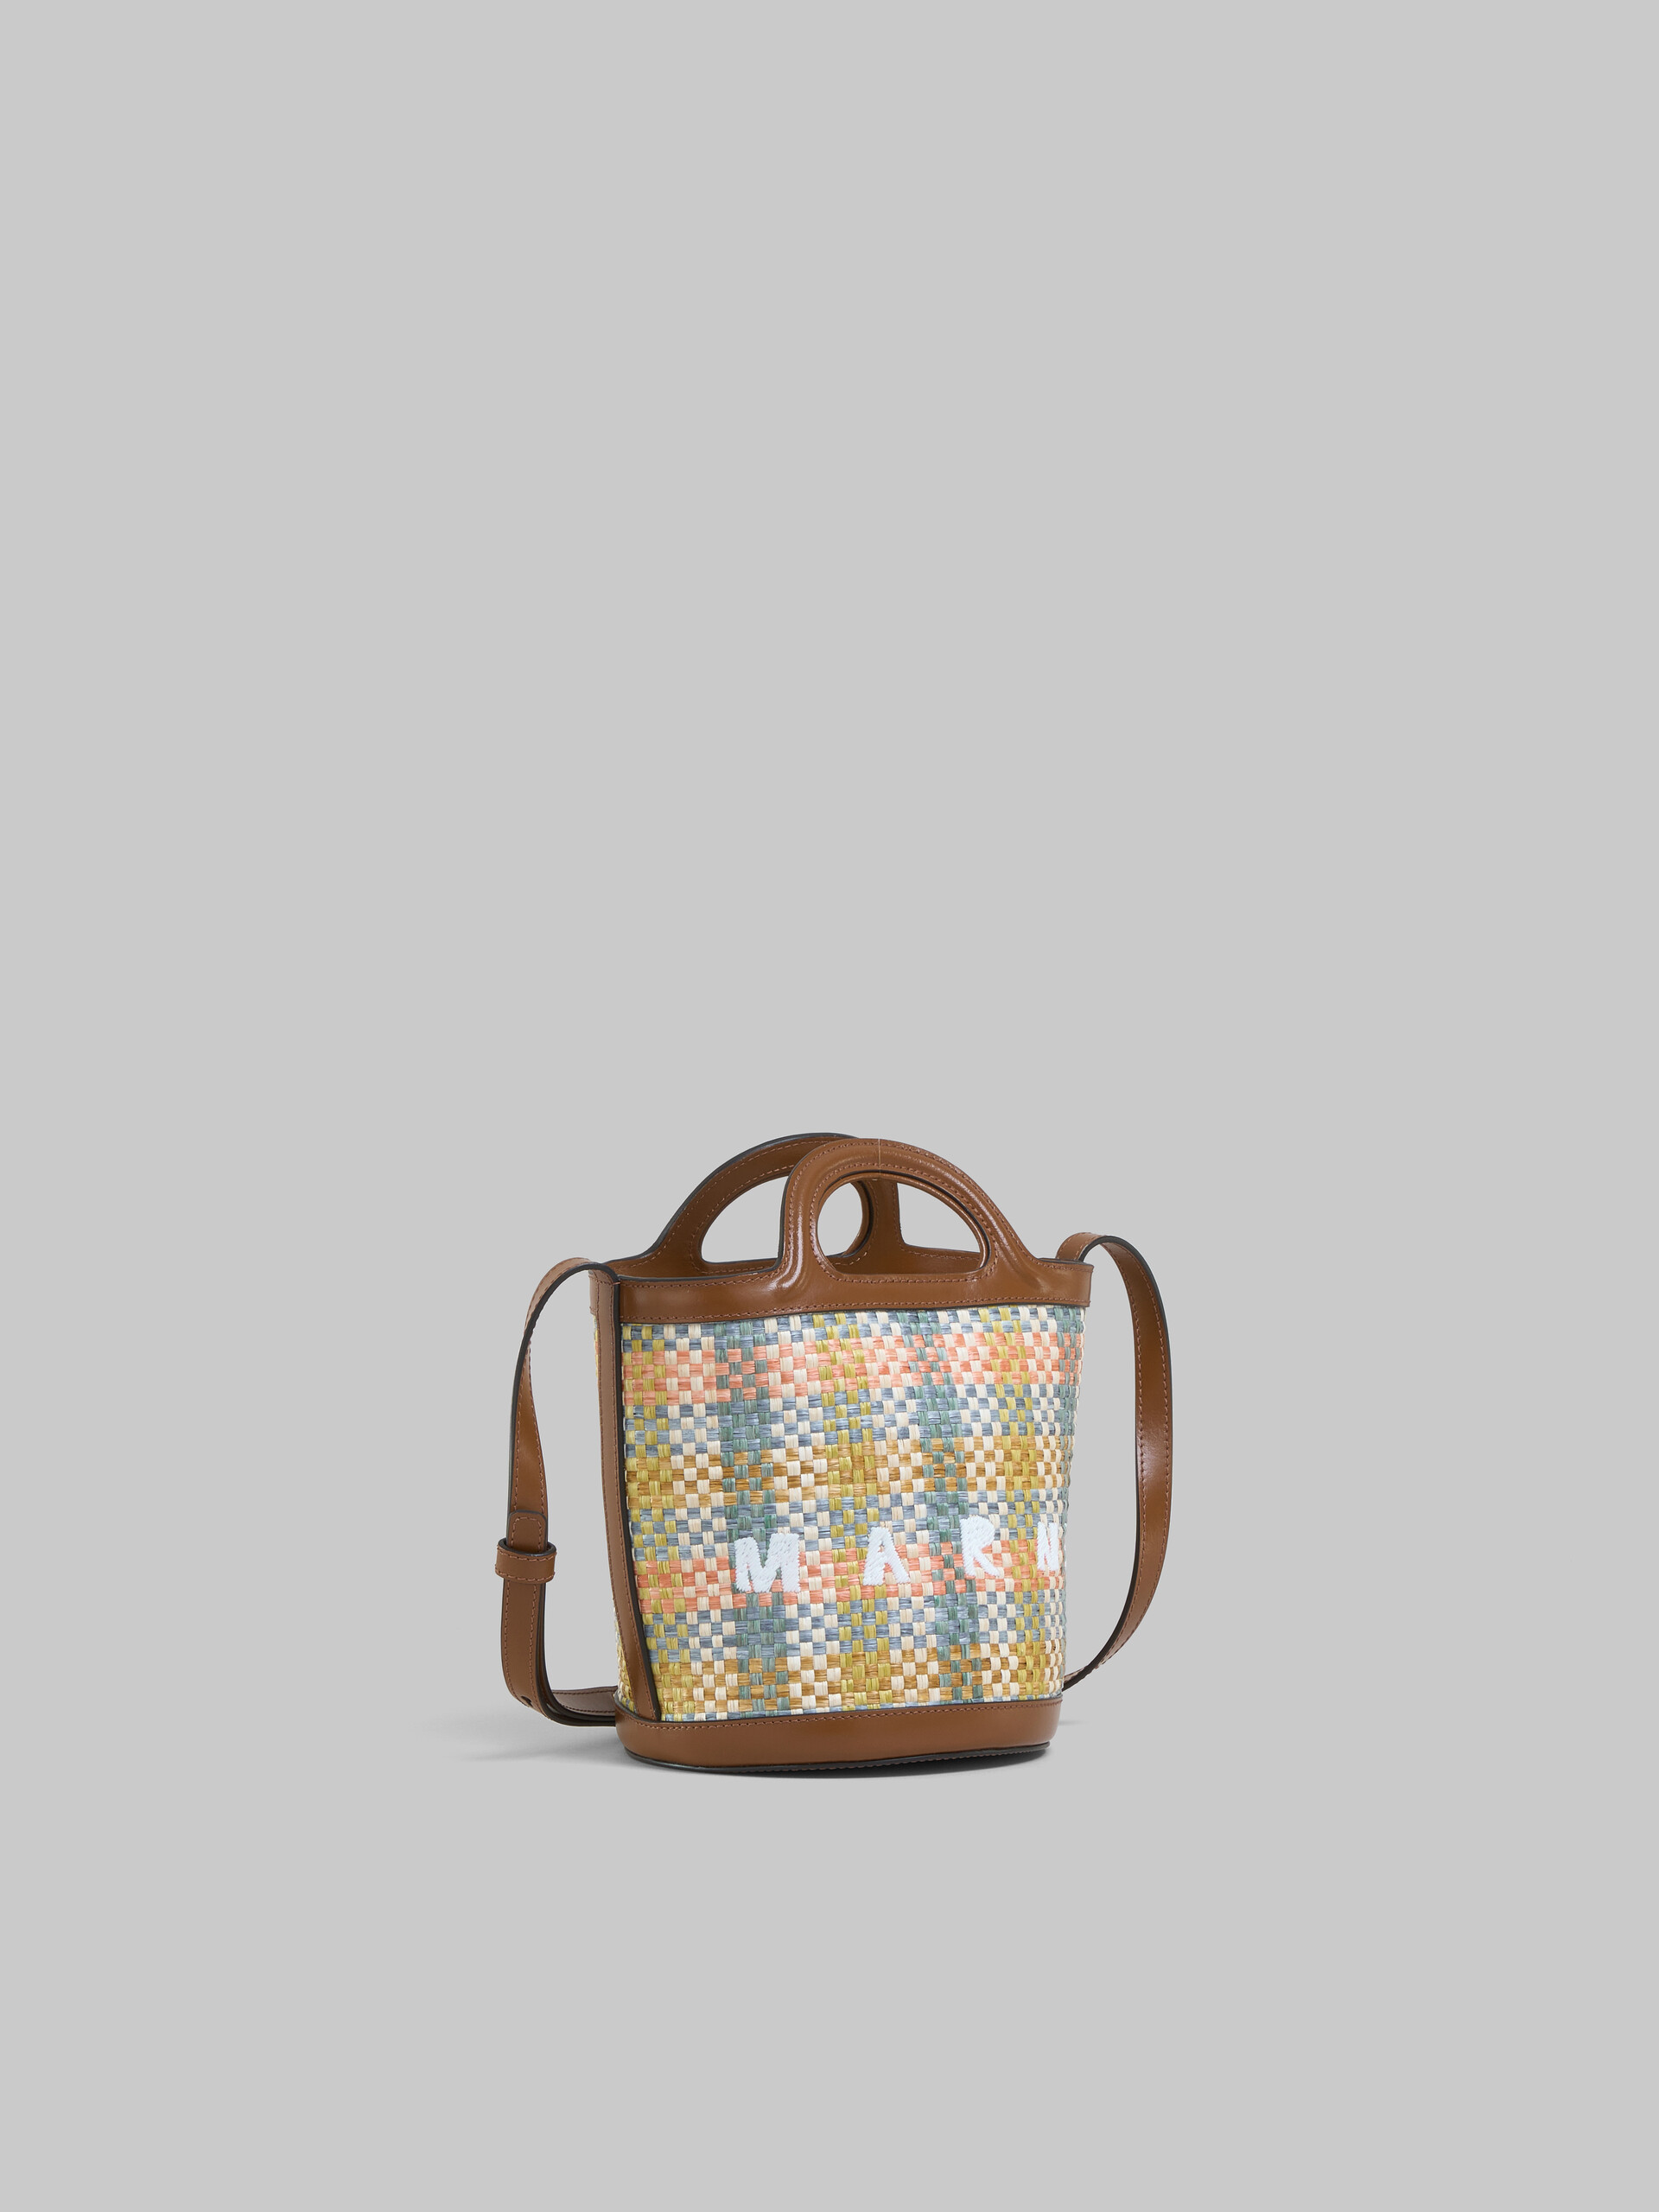 Tropicalia small bucket bag in brown leather and checked raffia-effect fabric - Shoulder Bags - Image 6